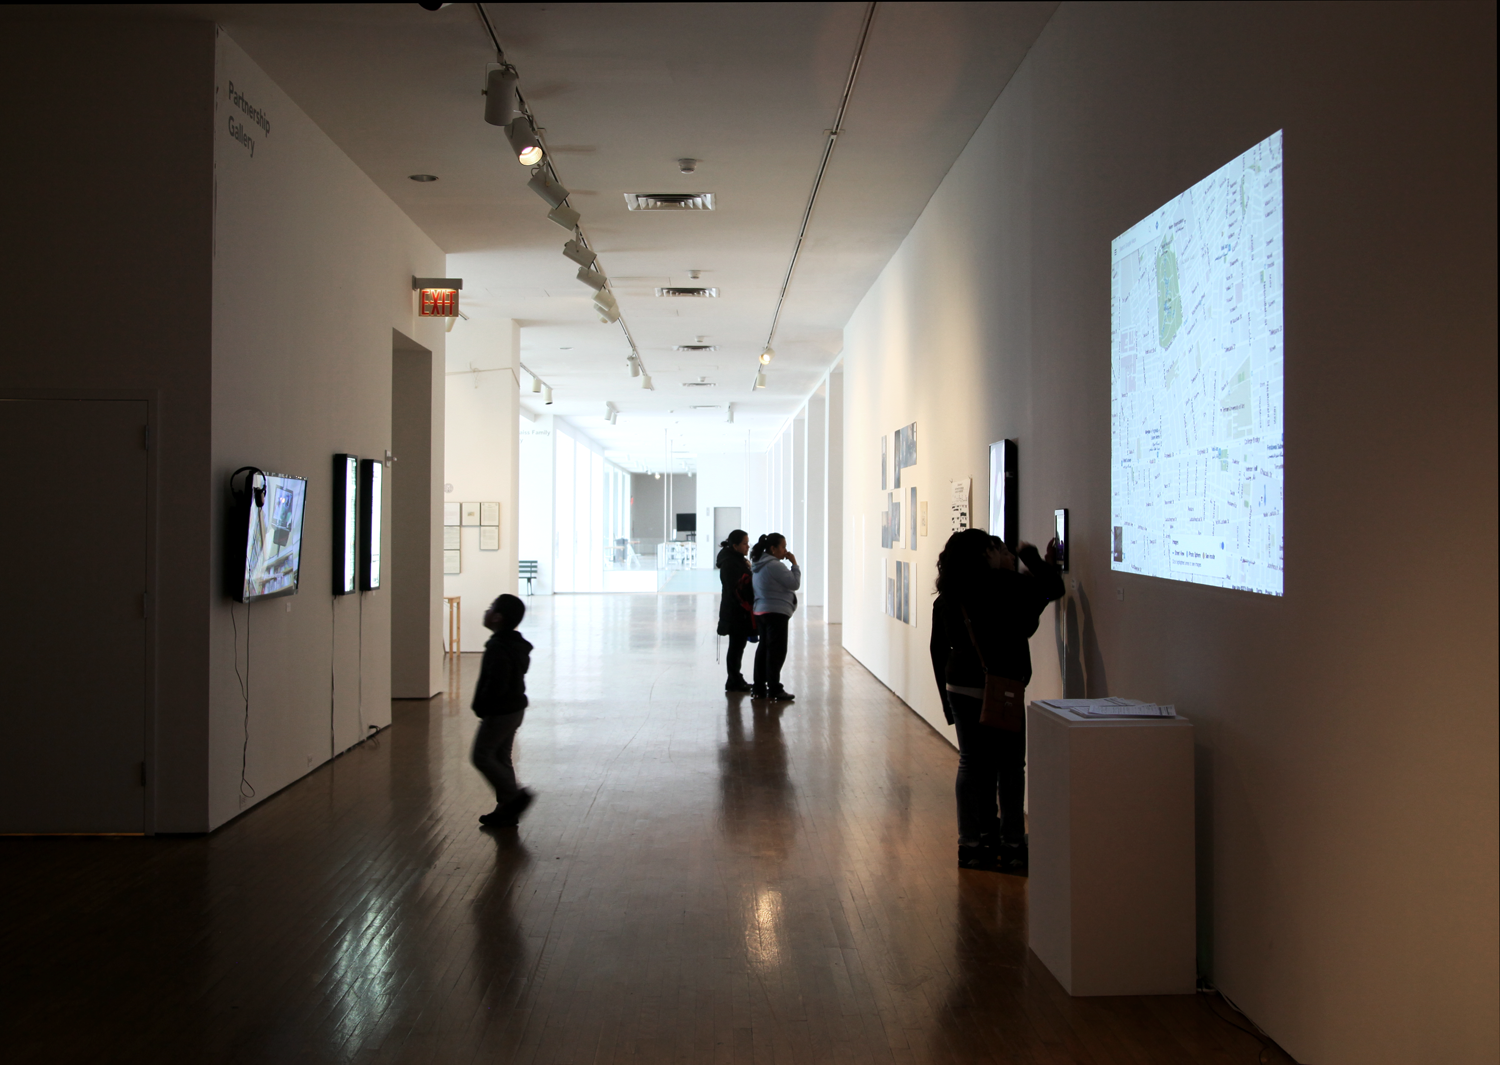  Exhibition view, with Anushya Badrinath's video  Kuwait, Egypt, India  (2013-16) to the left alongside Chitra Ganesh and Mariam Ghani's lightboxes  The Index of Democracy Is The Interval Between Inquiry and Info  (2013) and  Reasonable Articulable S